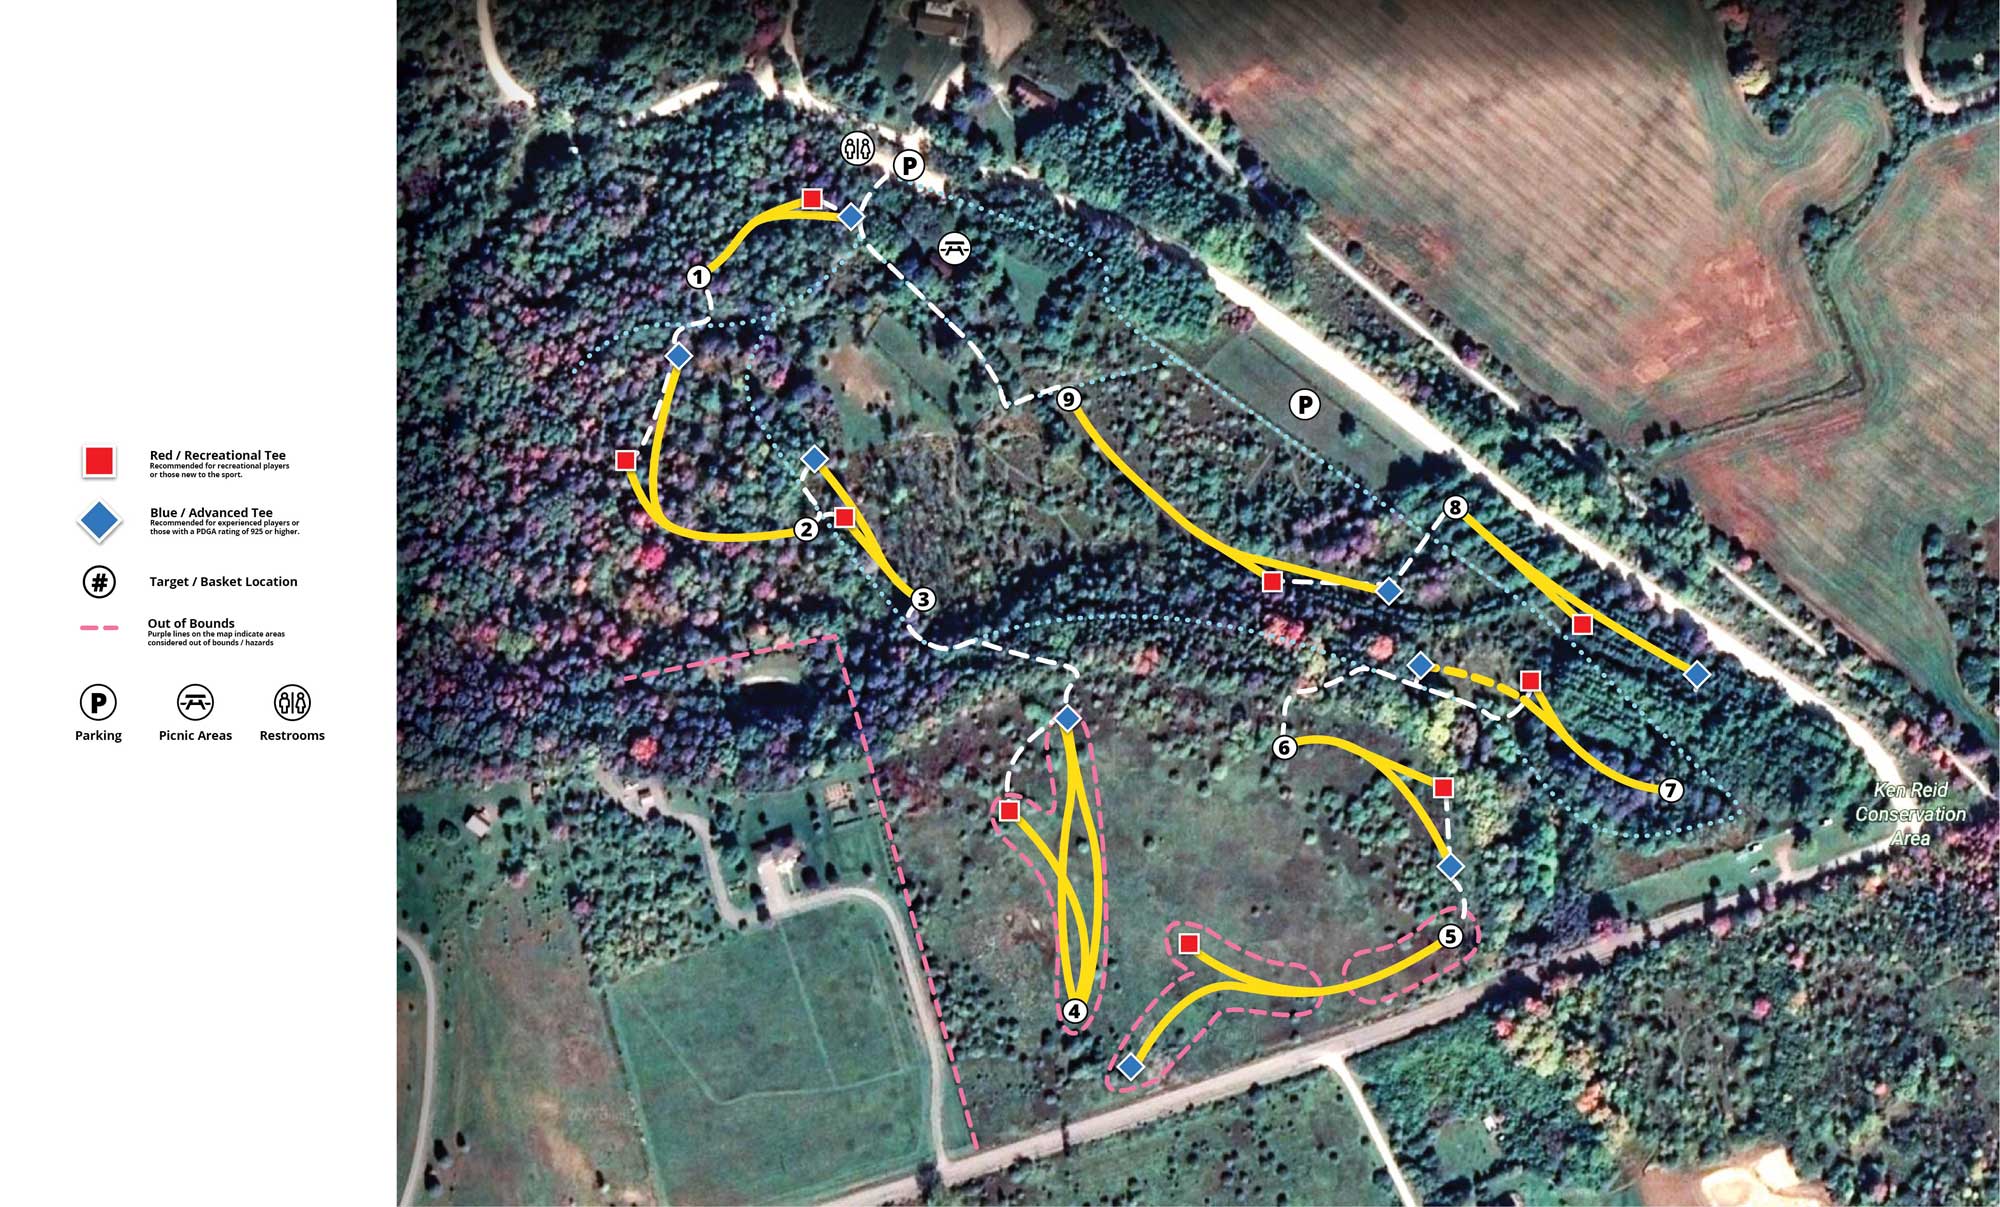 Map of the 9-hole disc golf layout at Ken Reid Conservation Area